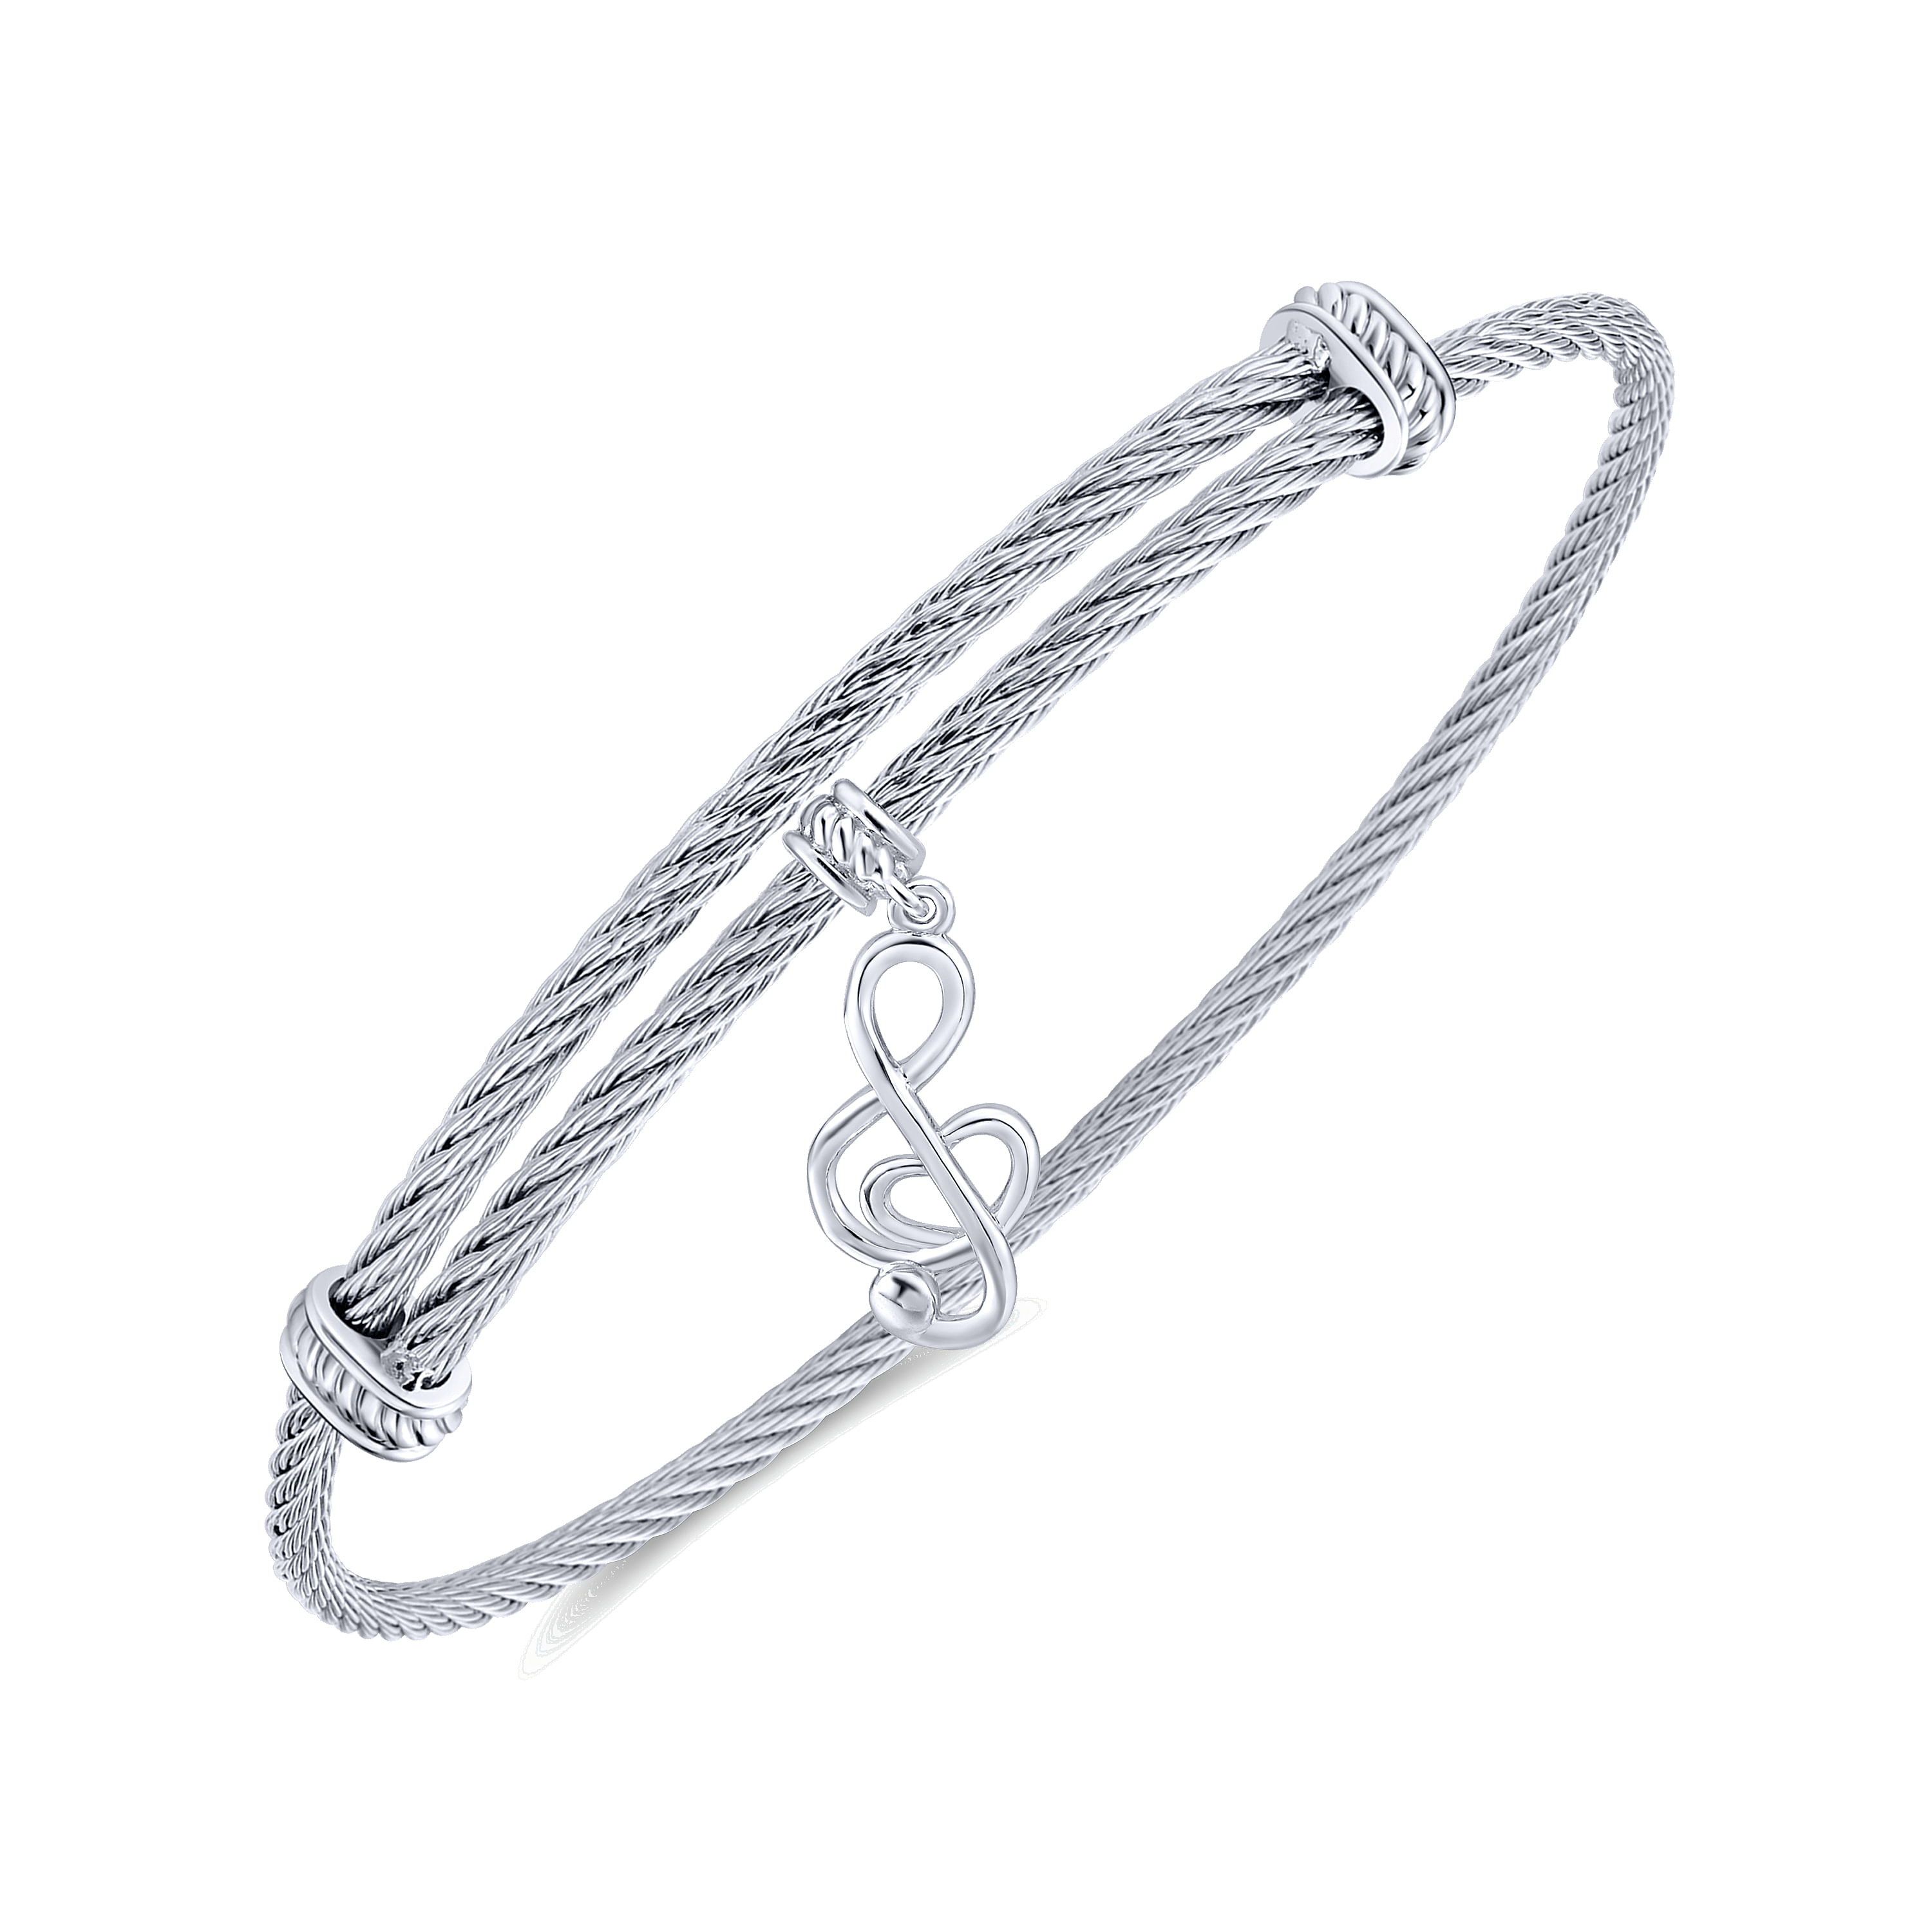 Adjustable Twisted Cable Stainless Steel Bangle with Sterling Silver Music Note Charm